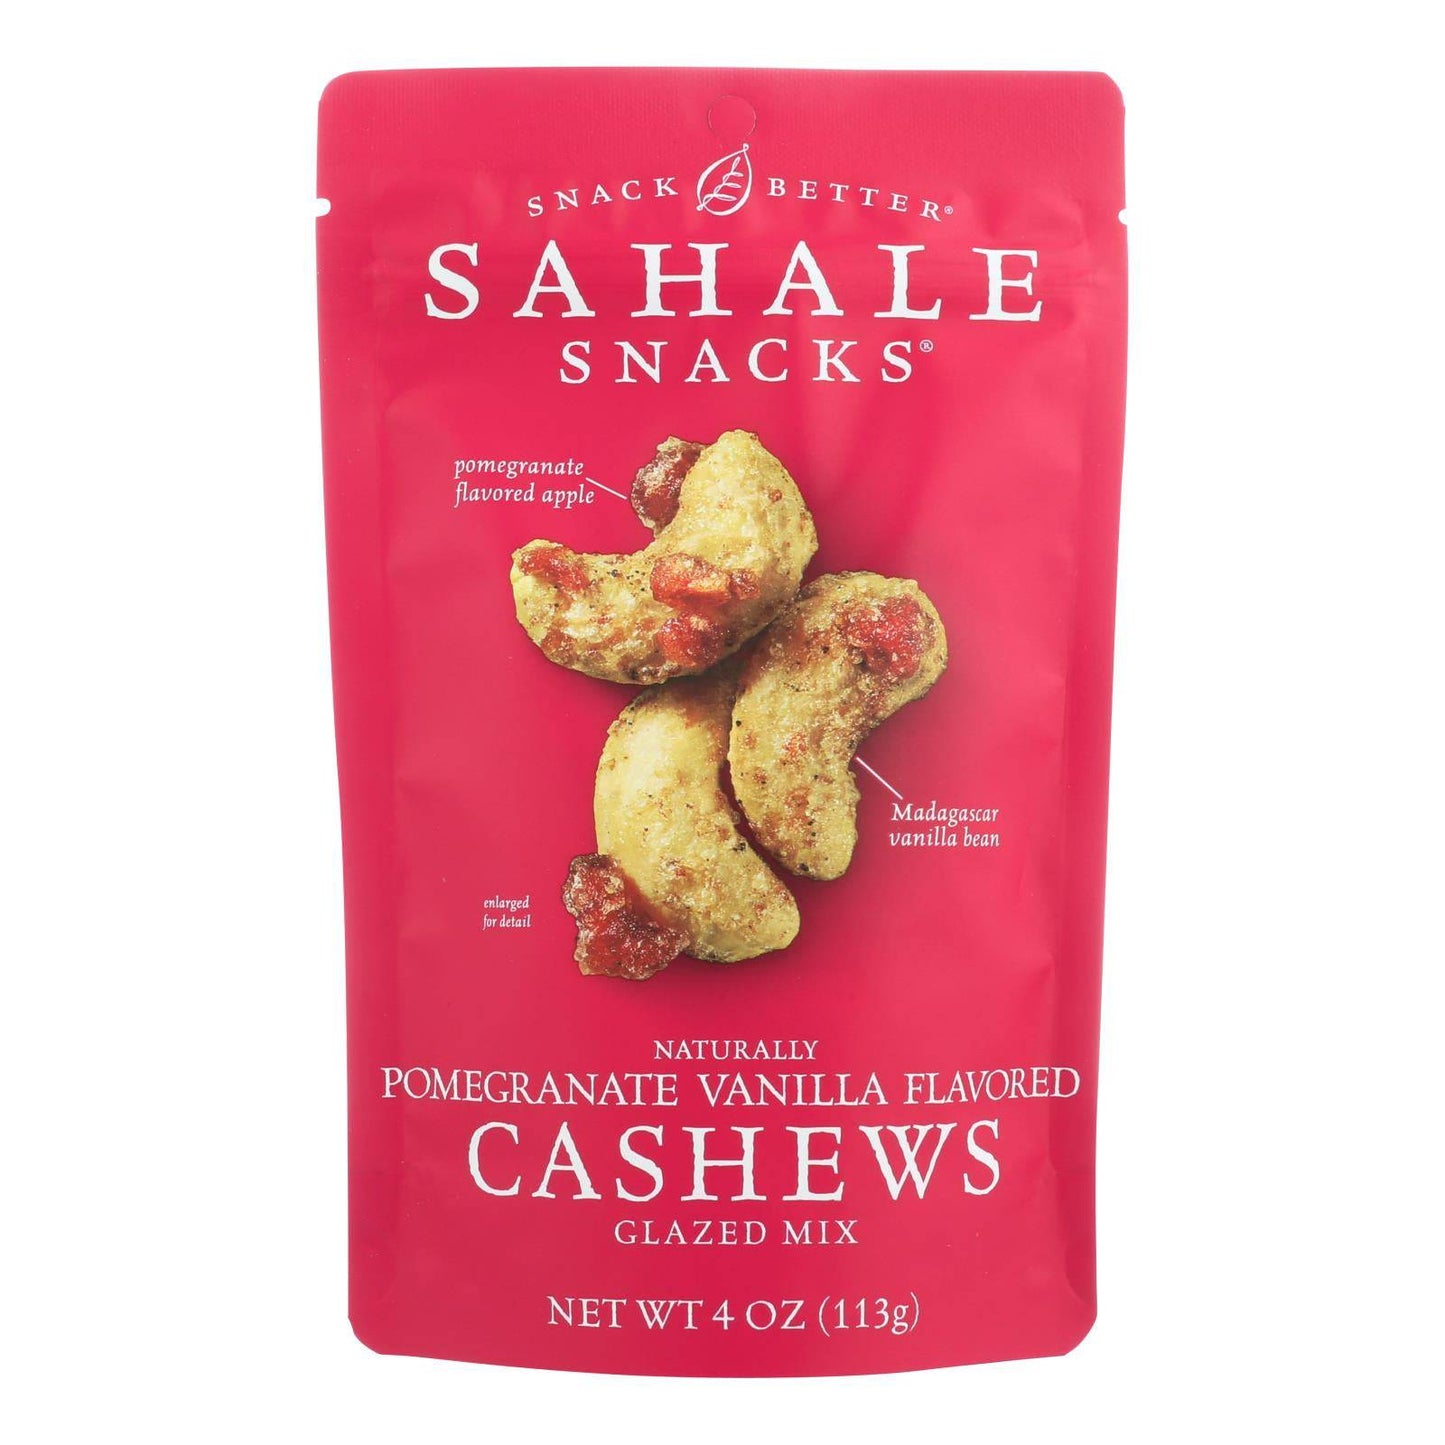 Buy Sahale Snacks Cashews Glazed Nuts - Pomegranate And Vanilla - Case Of 6 - 4 Oz.  at OnlyNaturals.us